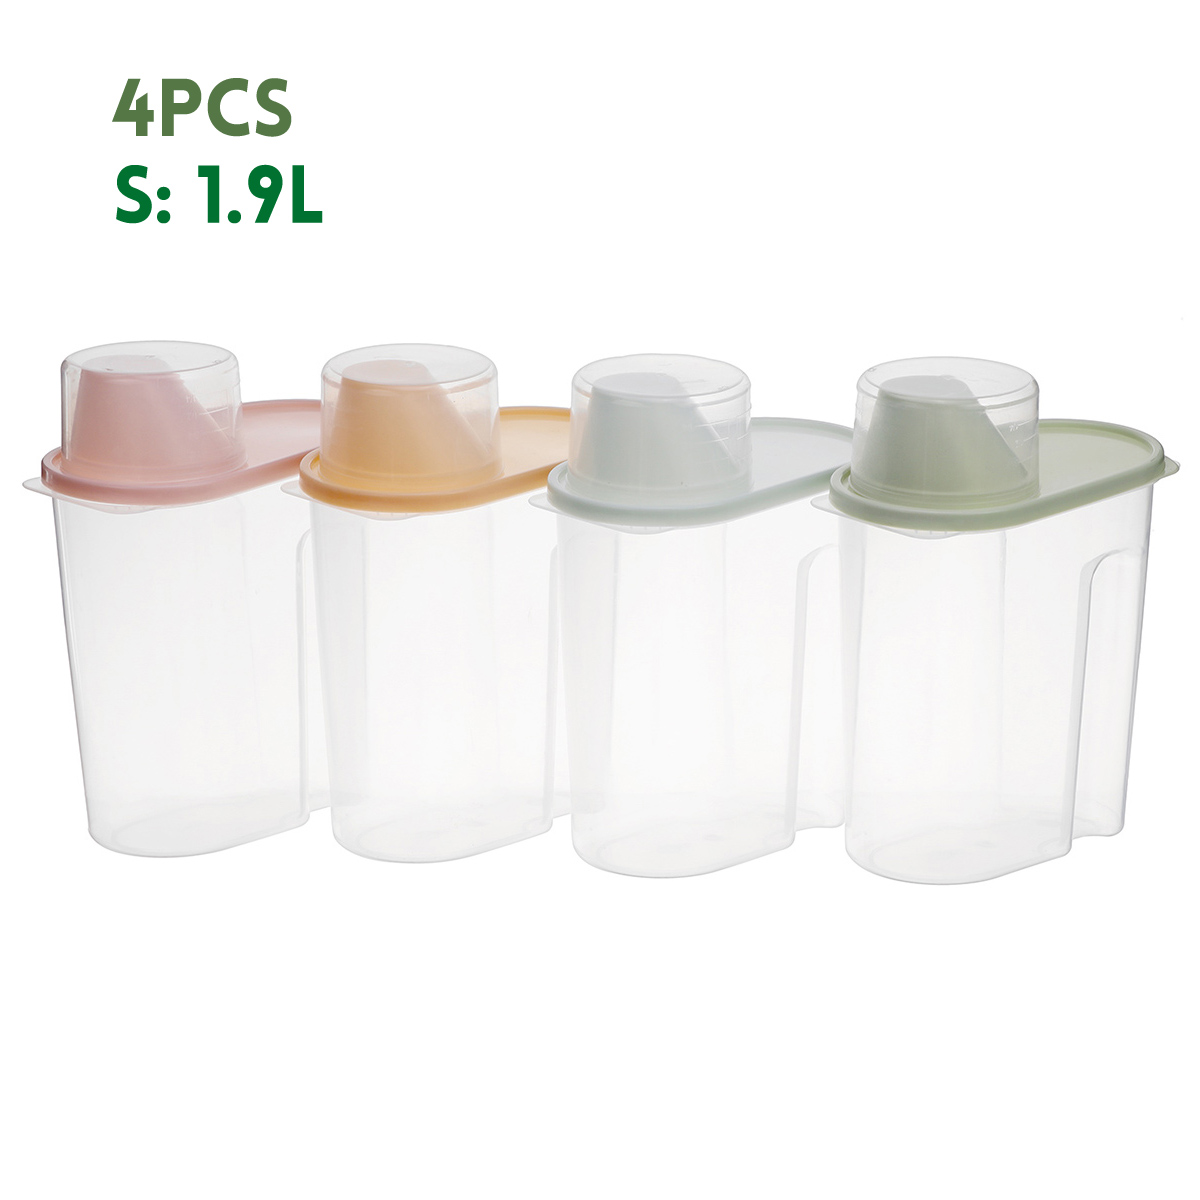 4Pcs-Cereal-Storage-Box-Plastic-Rice-Container-Food-Sealed-Jar-Cans-Kitchen-Grain-Dried-Fruit-Snacks-1730653-9